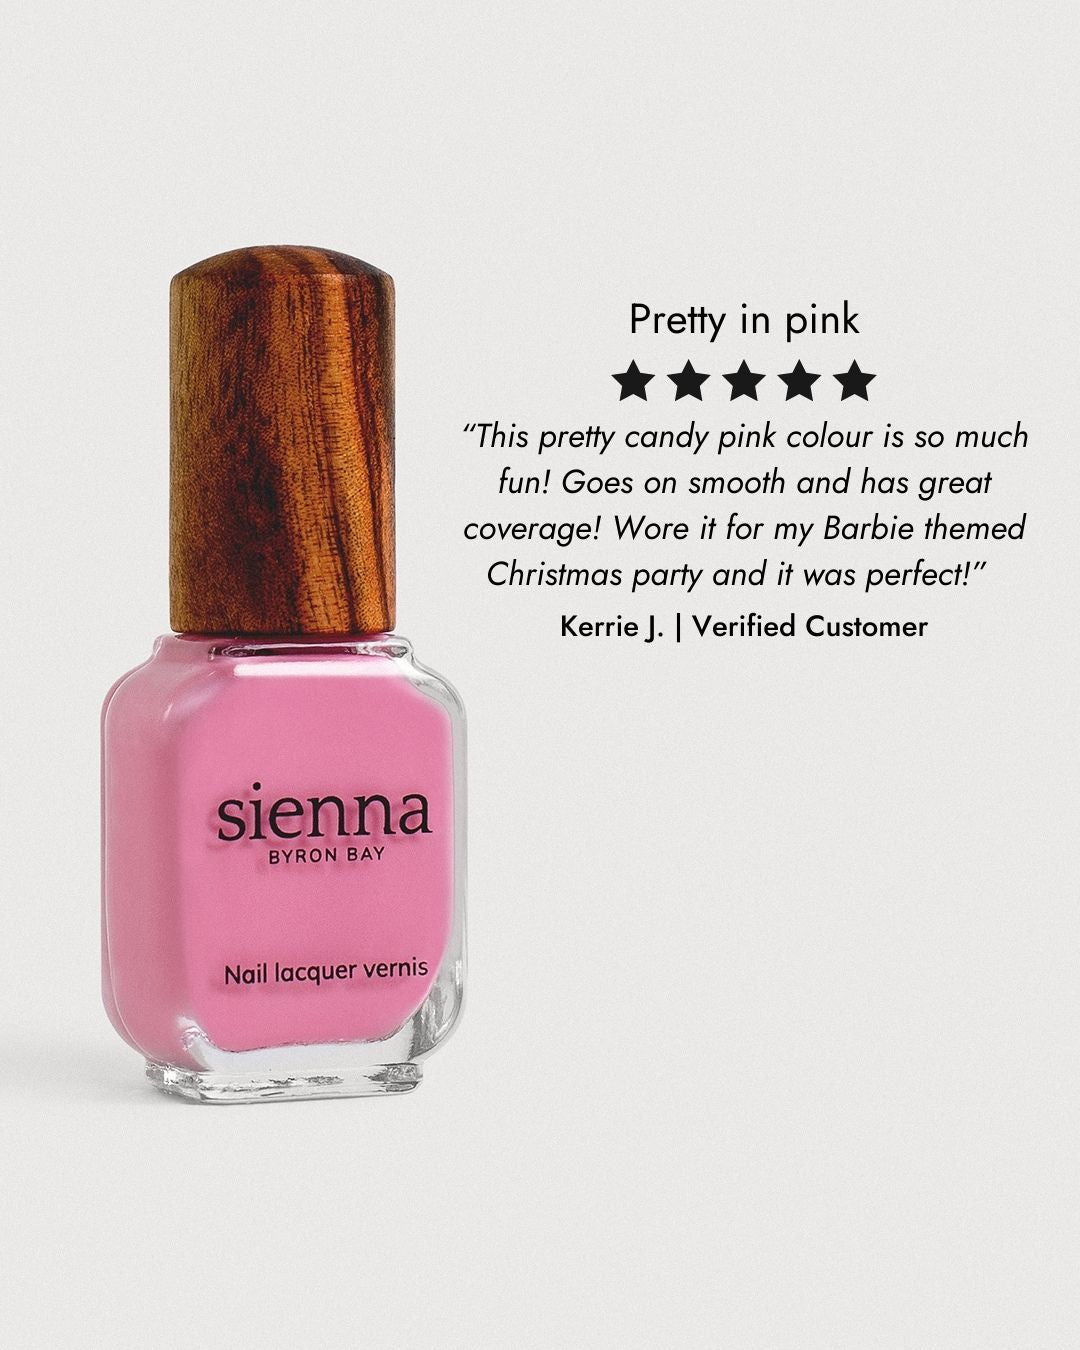 classic lolly pink nail polish glass bottle with 5 star review